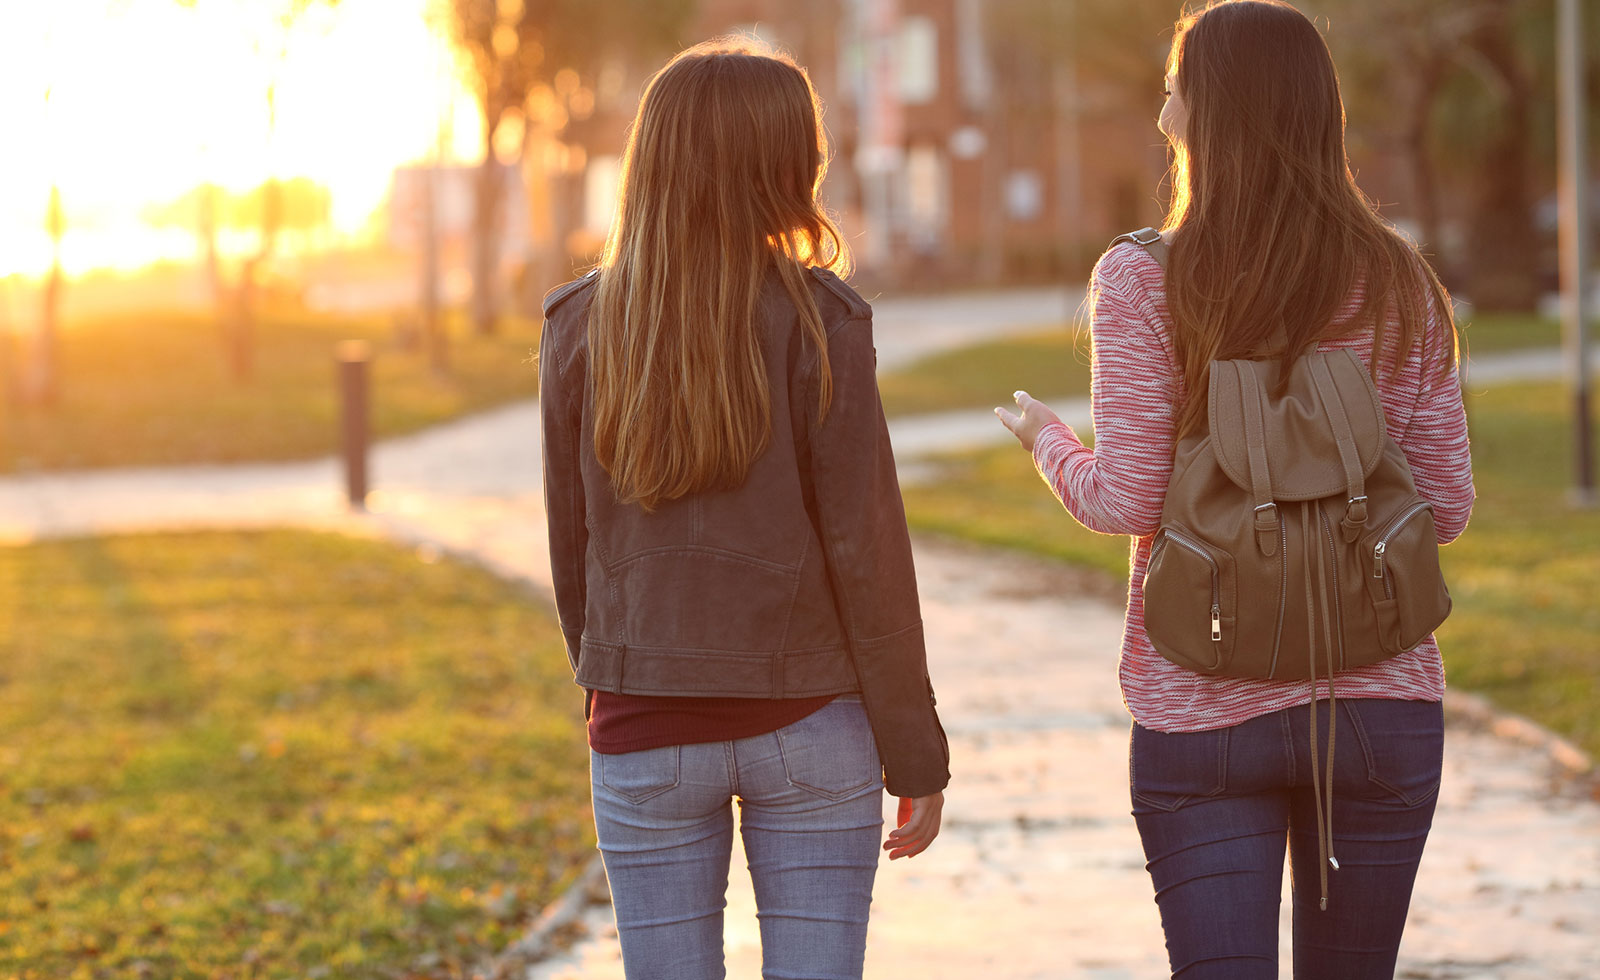 Two females on a college campus walking and talking